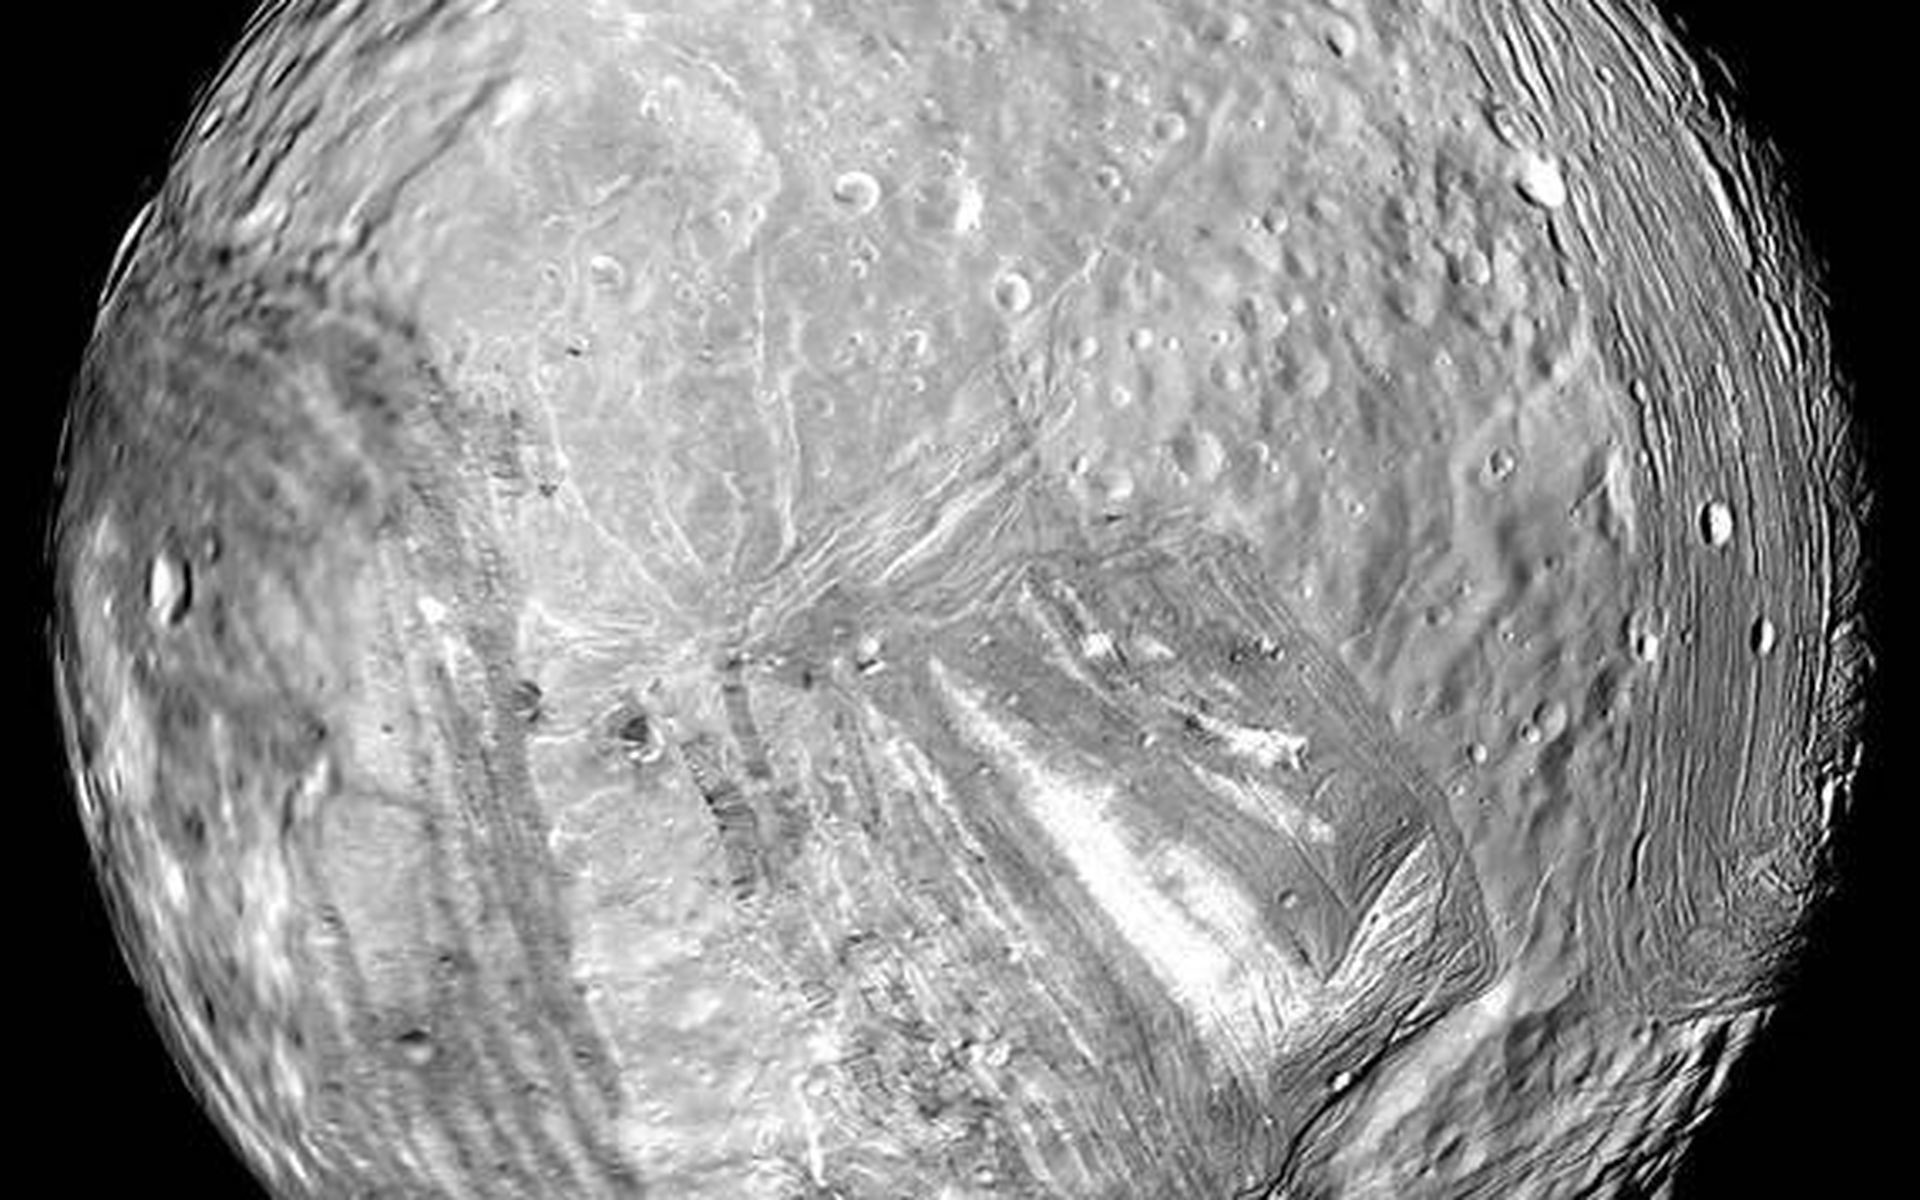 1920x1200 Uranus' icy moon Miranda is seen in this image from Voyager 2 on January 24